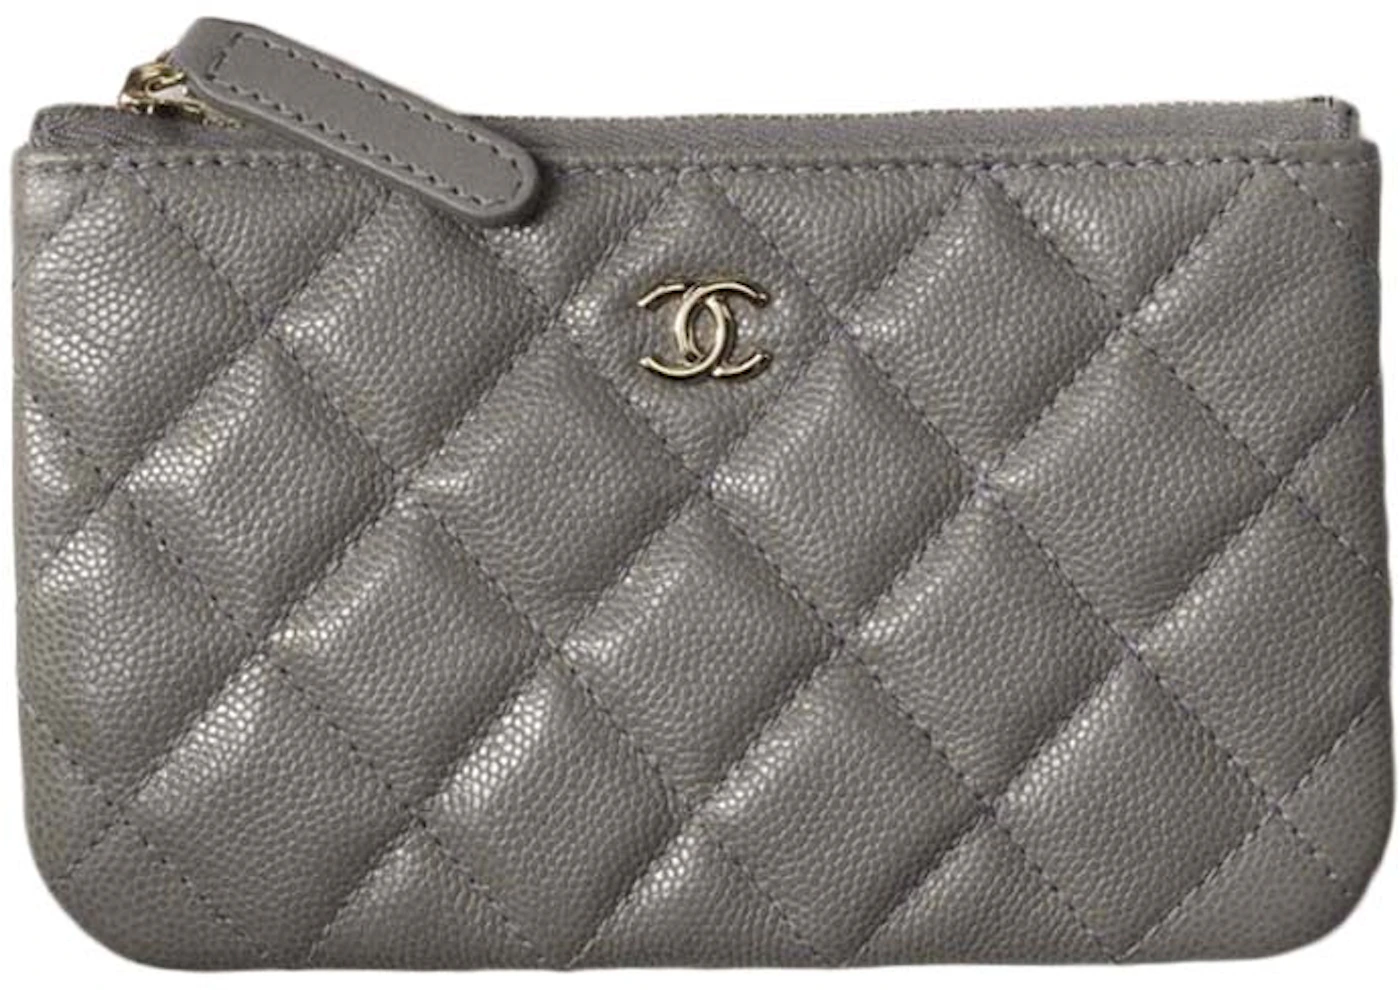 Chanel Classic Pouch Mini A82365 Gray in Grained Calfskin Leather